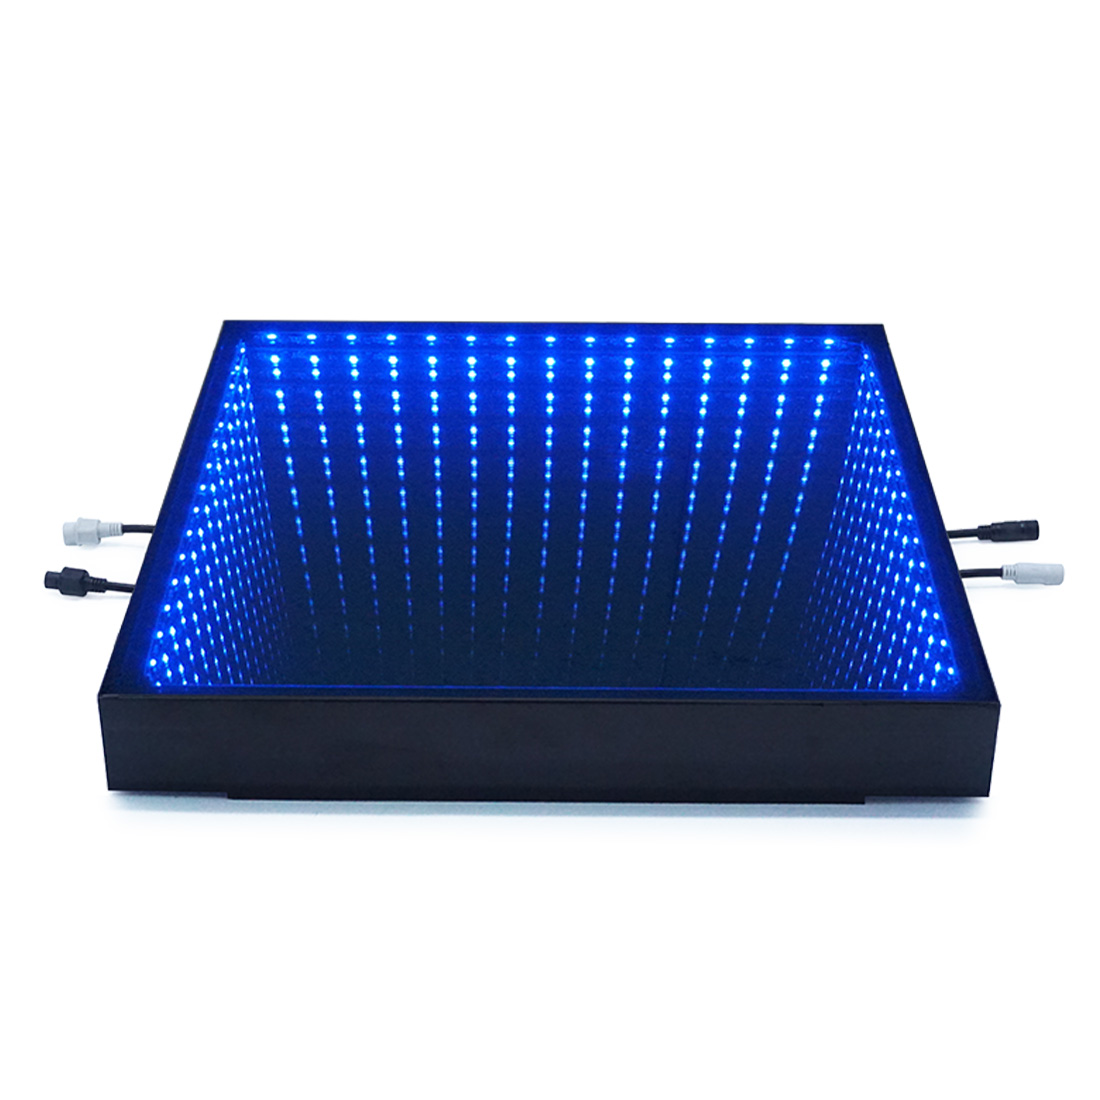 Infinity Mirror 3D LED Dance Floor Stage Lighting Effect Wireless Remote Light Tiles RGB 3in1 DMX Flooring Panel for Events Nightclubs Party Disco